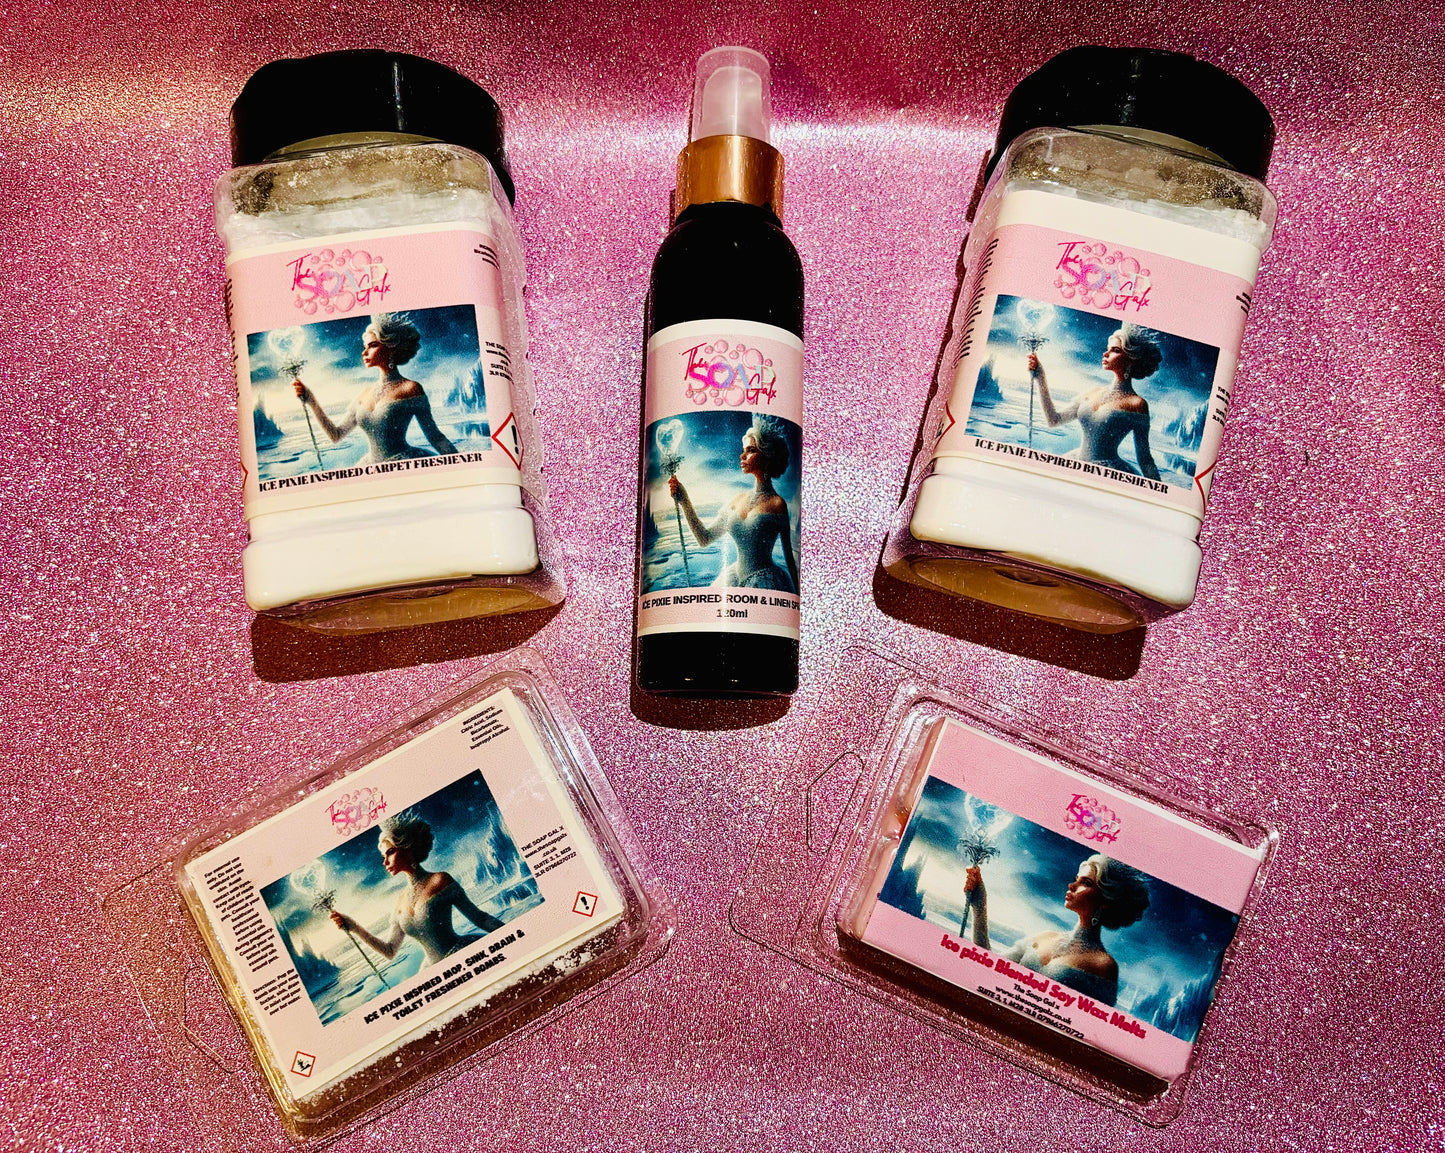 A collection of The Soap Gals' home fragrance products with matching labels on a sparkly pink background.